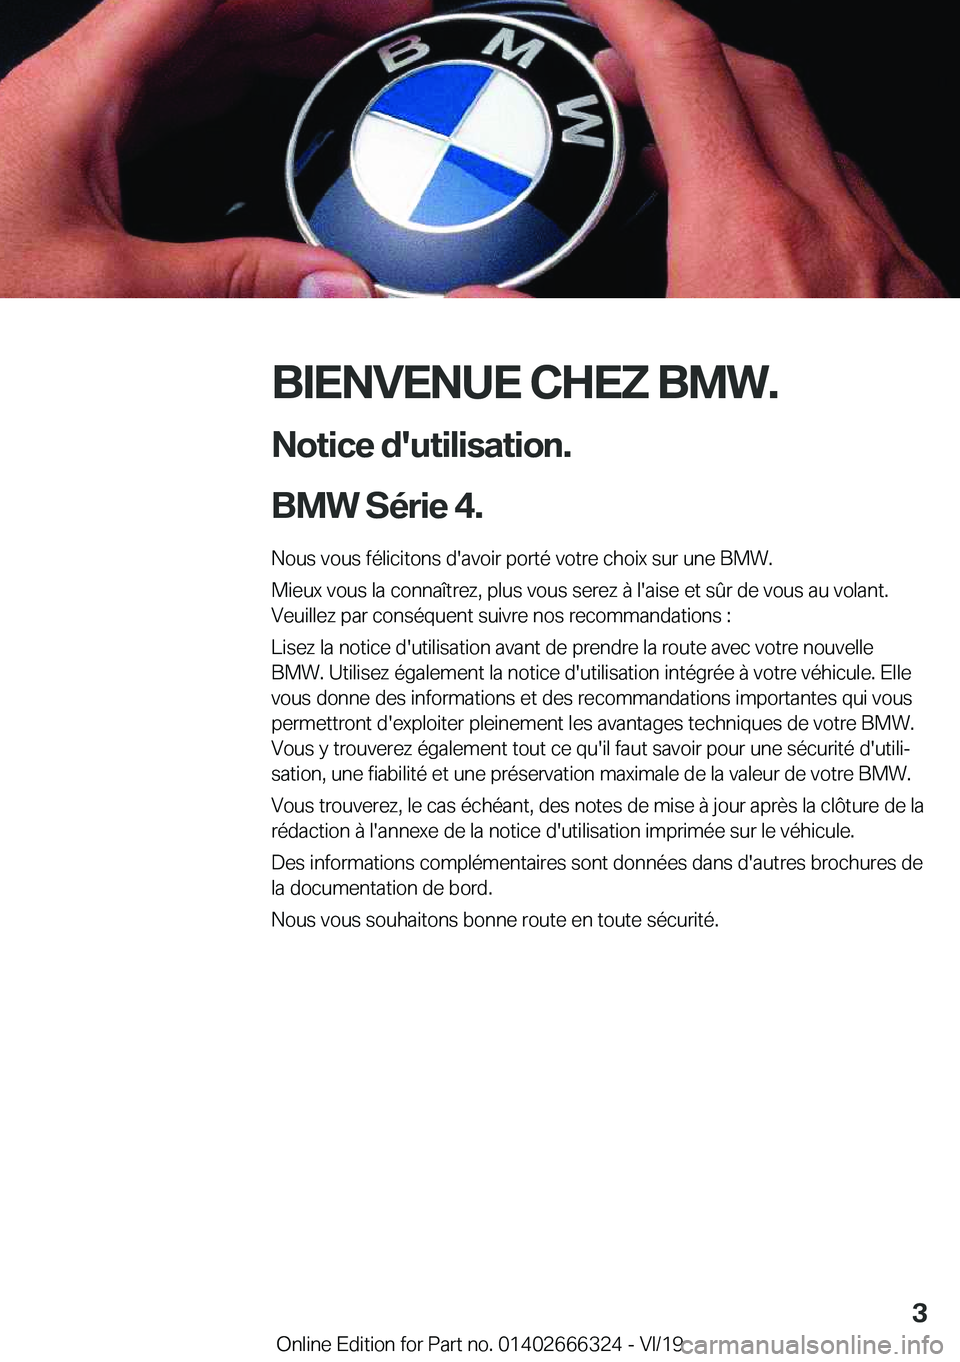 BMW 4 SERIES COUPE 2020  Notices Demploi (in French) �B�I�E�N�V�E�N�U�E��C�H�E�;��B�M�W�.�N�o�t�i�c�e��d�'�u�t�i�l�i�s�a�t�i�o�n�.
�B�M�W��S�é�r�i�e��4�.�
�N�o�u�s��v�o�u�s��f�é�l�i�c�i�t�o�n�s��d�'�a�v�o�i�r��p�o�r�t�é��v�o�t�r�e�